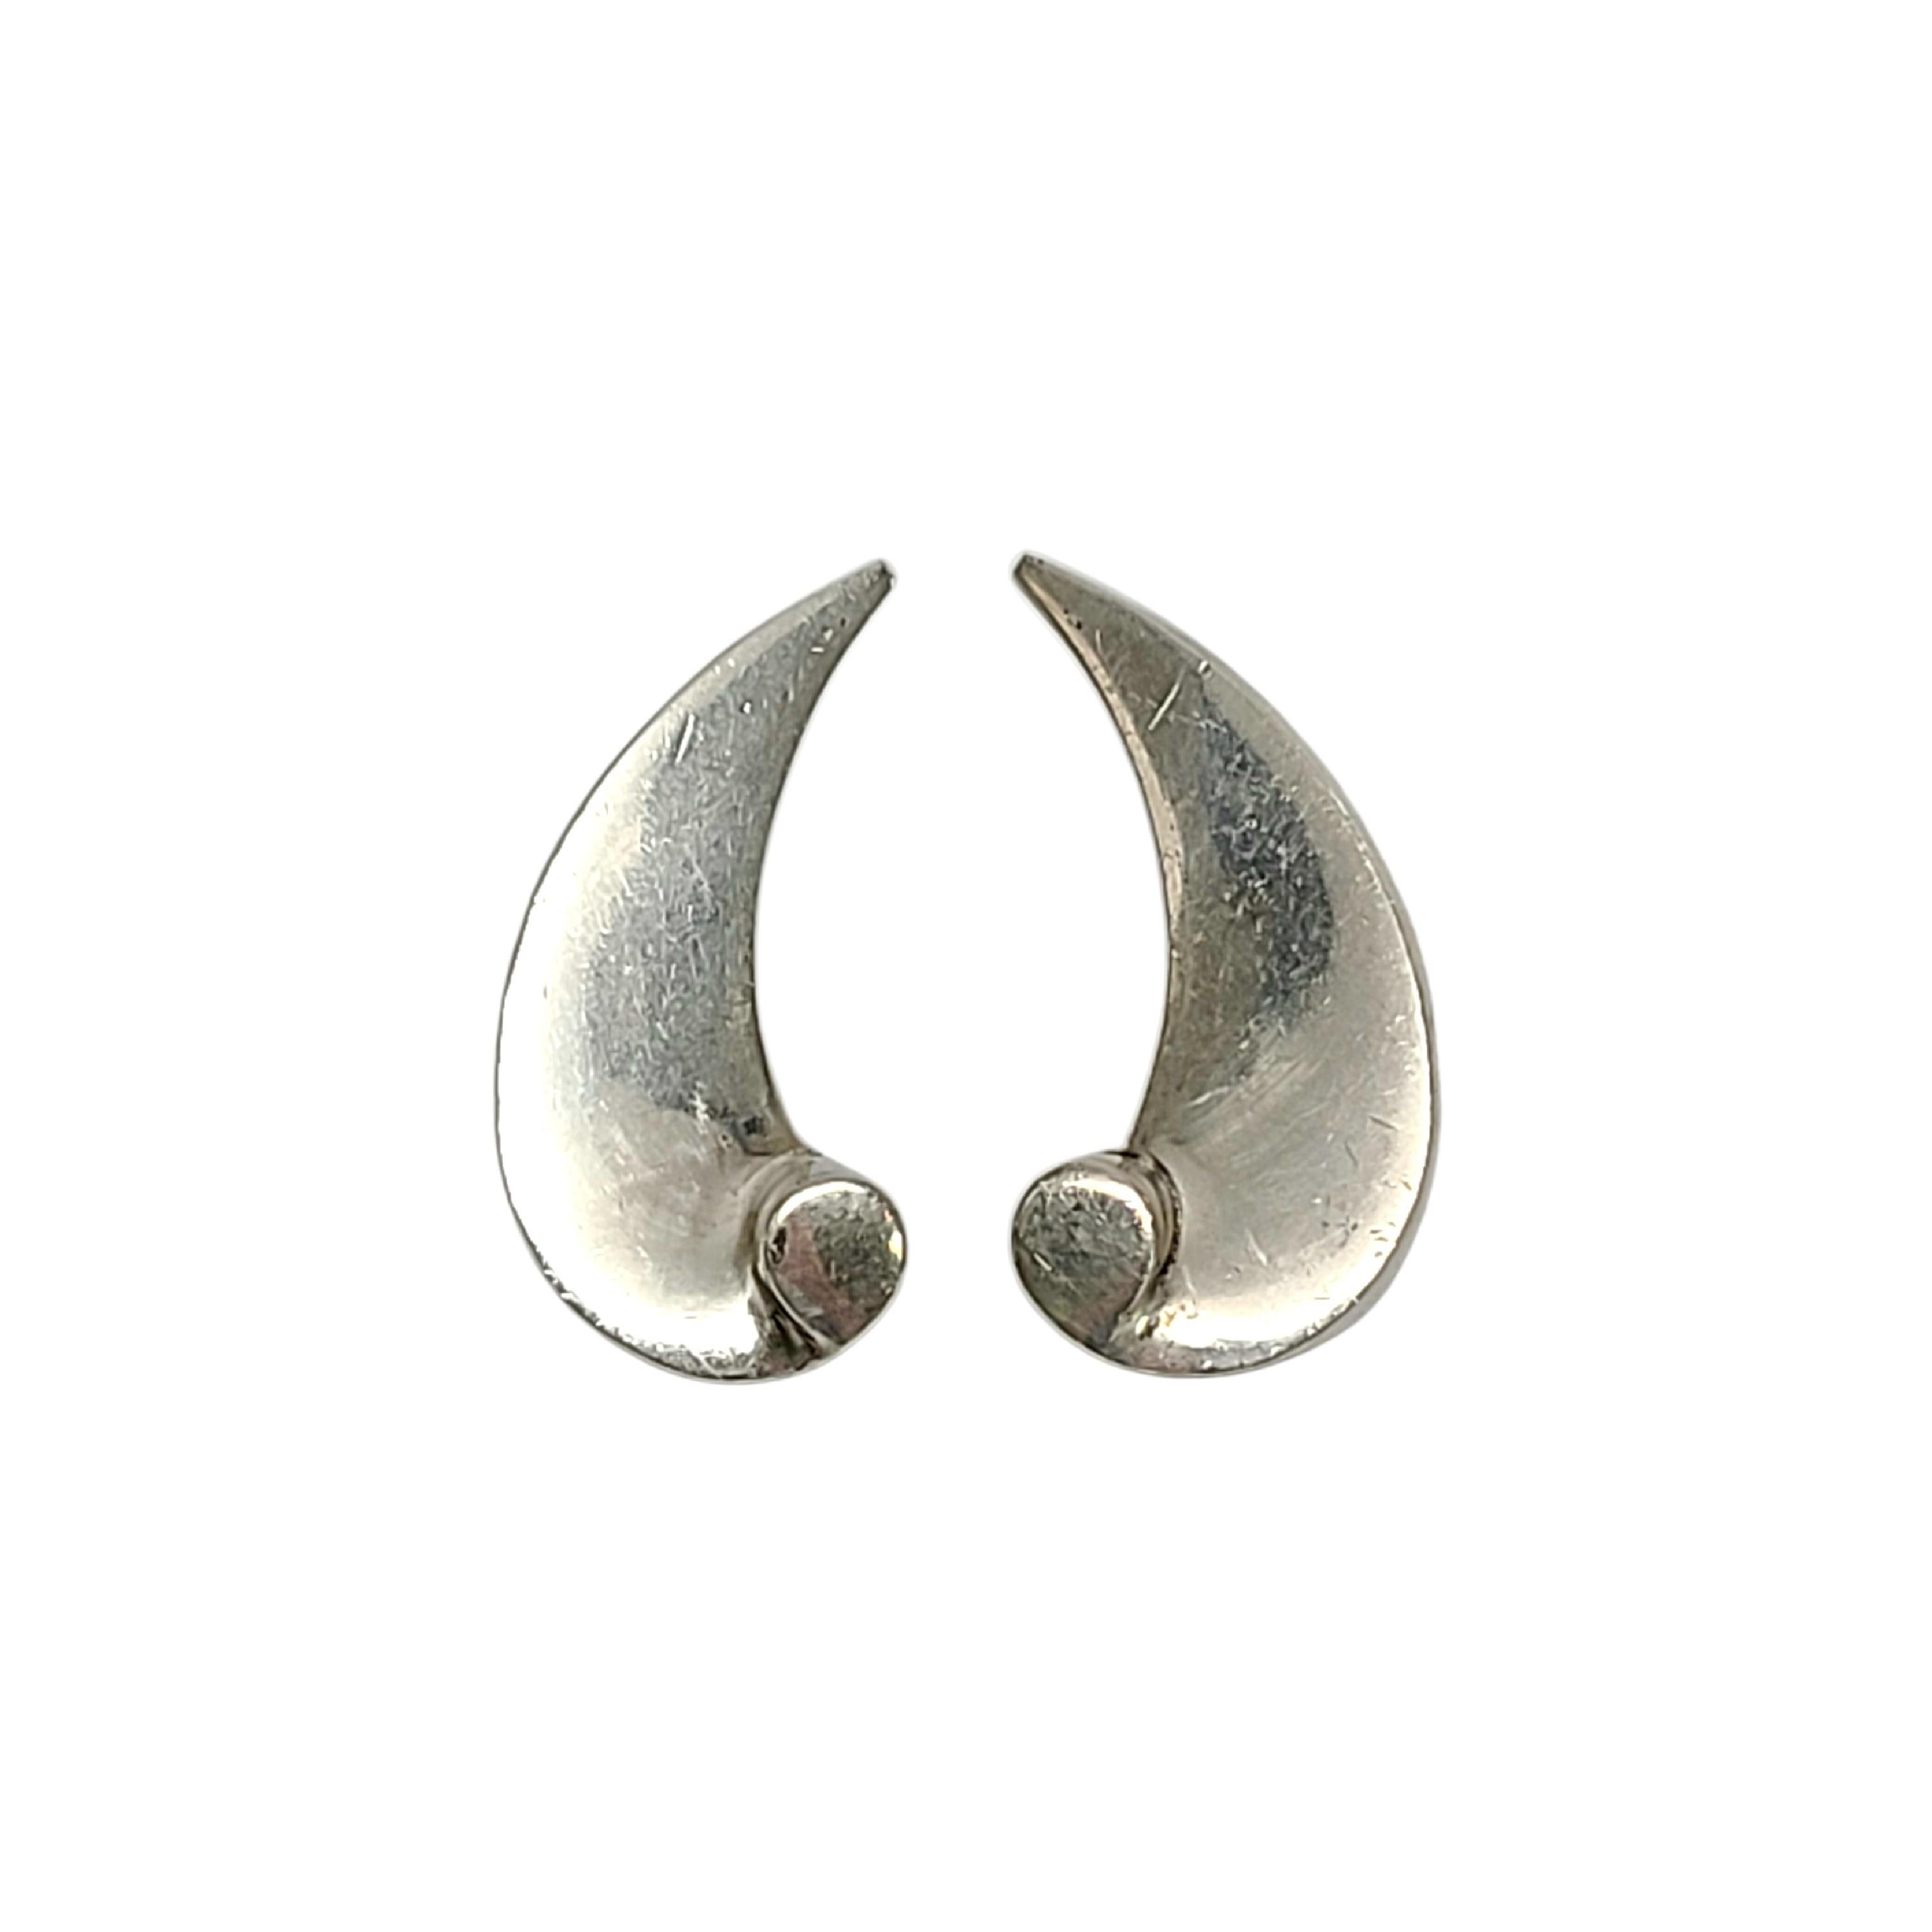 Taxco, Mexico 970 silver Wave Design screwback earrings by Antonio Pineda.

These screwback earrings feature renowned master silversmith Antonio Pineda's iconic wave design.

Measures approx 1 1/8